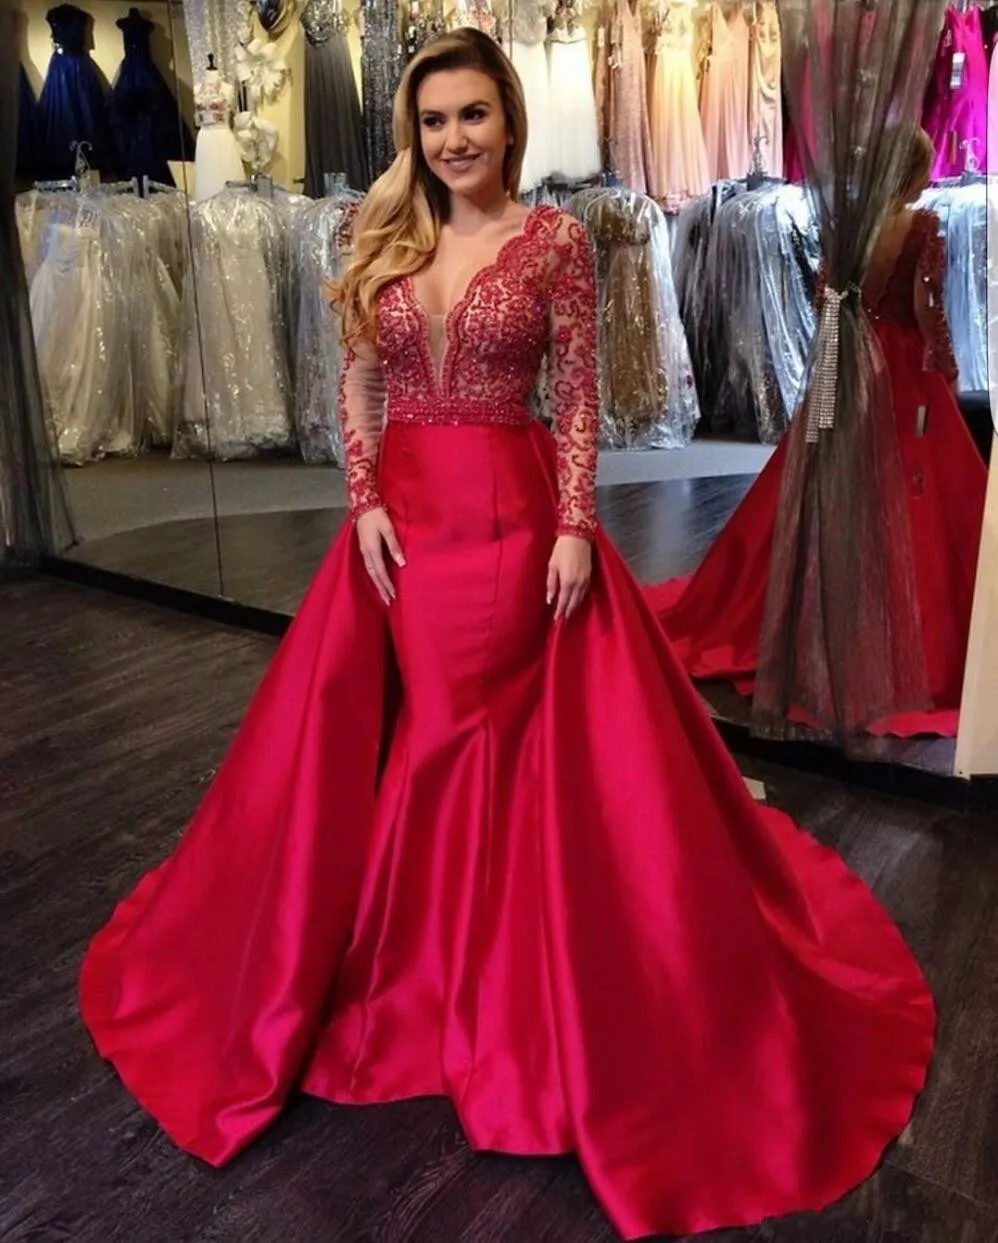 New Designer 2018 Satin Mermaid Overskirts Evening Dresses Turkey Lace Appliqued Long Sleeve Prom Gowns V Neck Beaded Party Dress